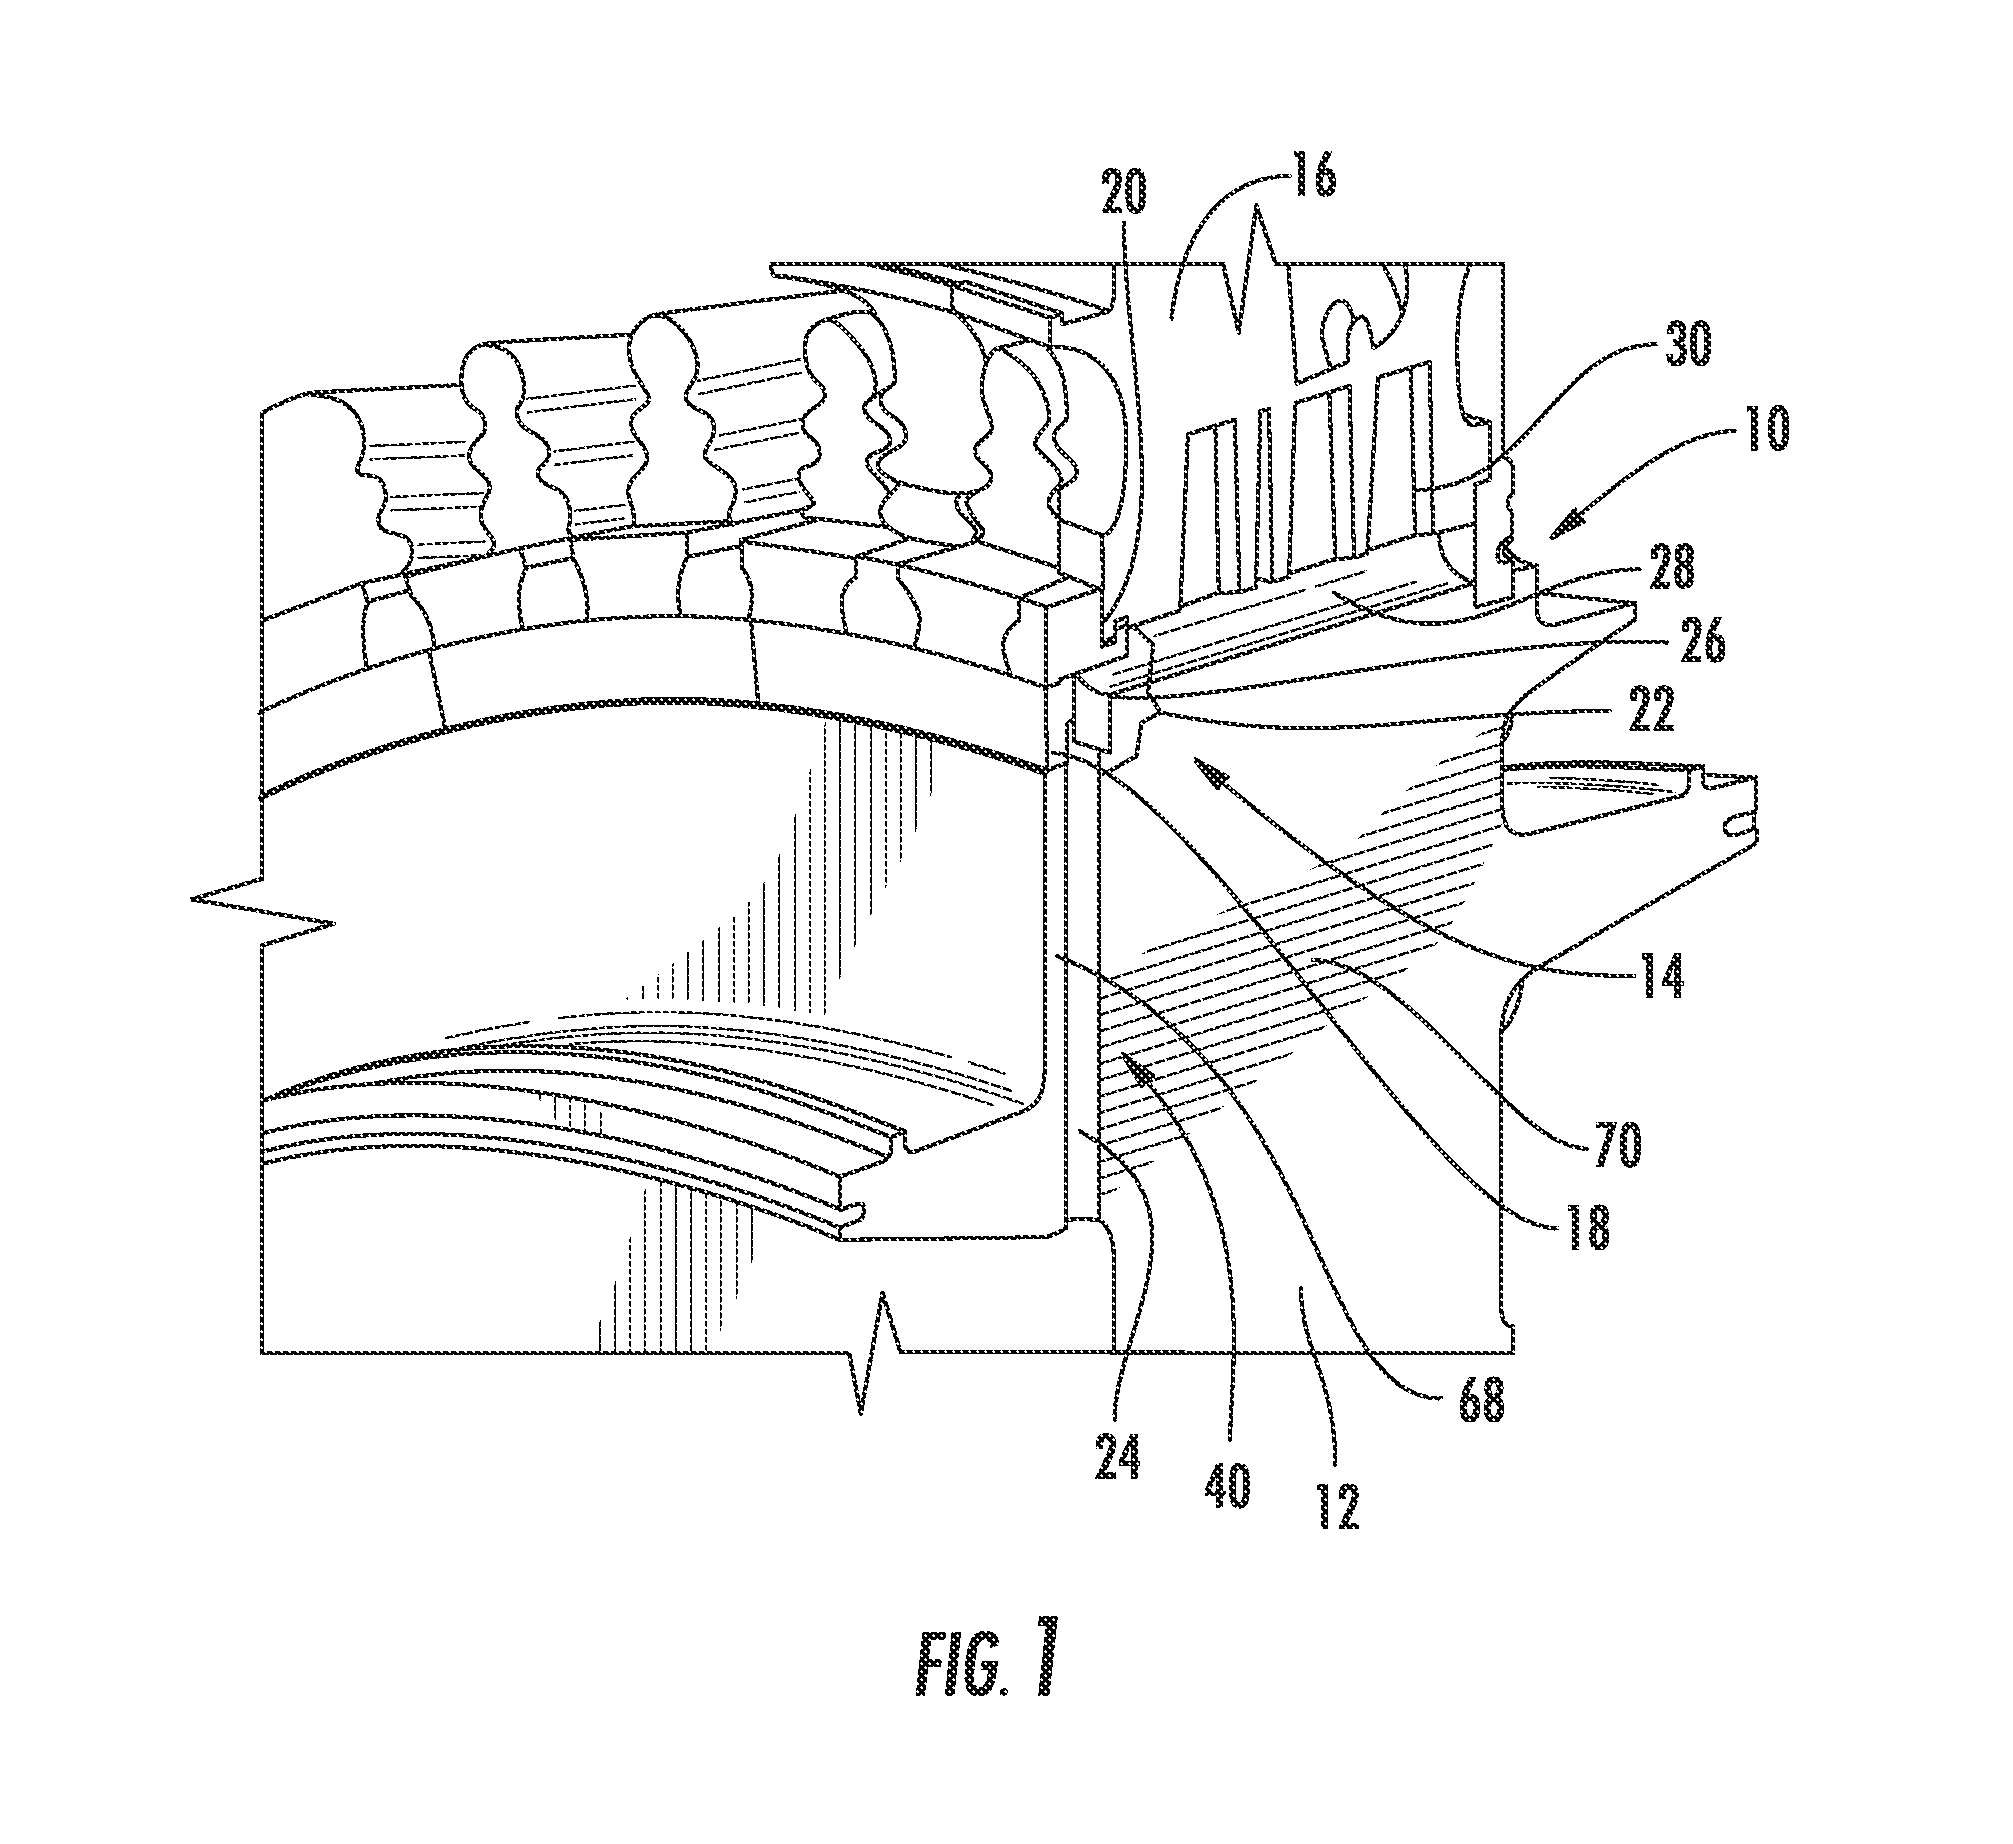 Seal system for cooling fluid flow through a rotor assembly in a gas turbine engine